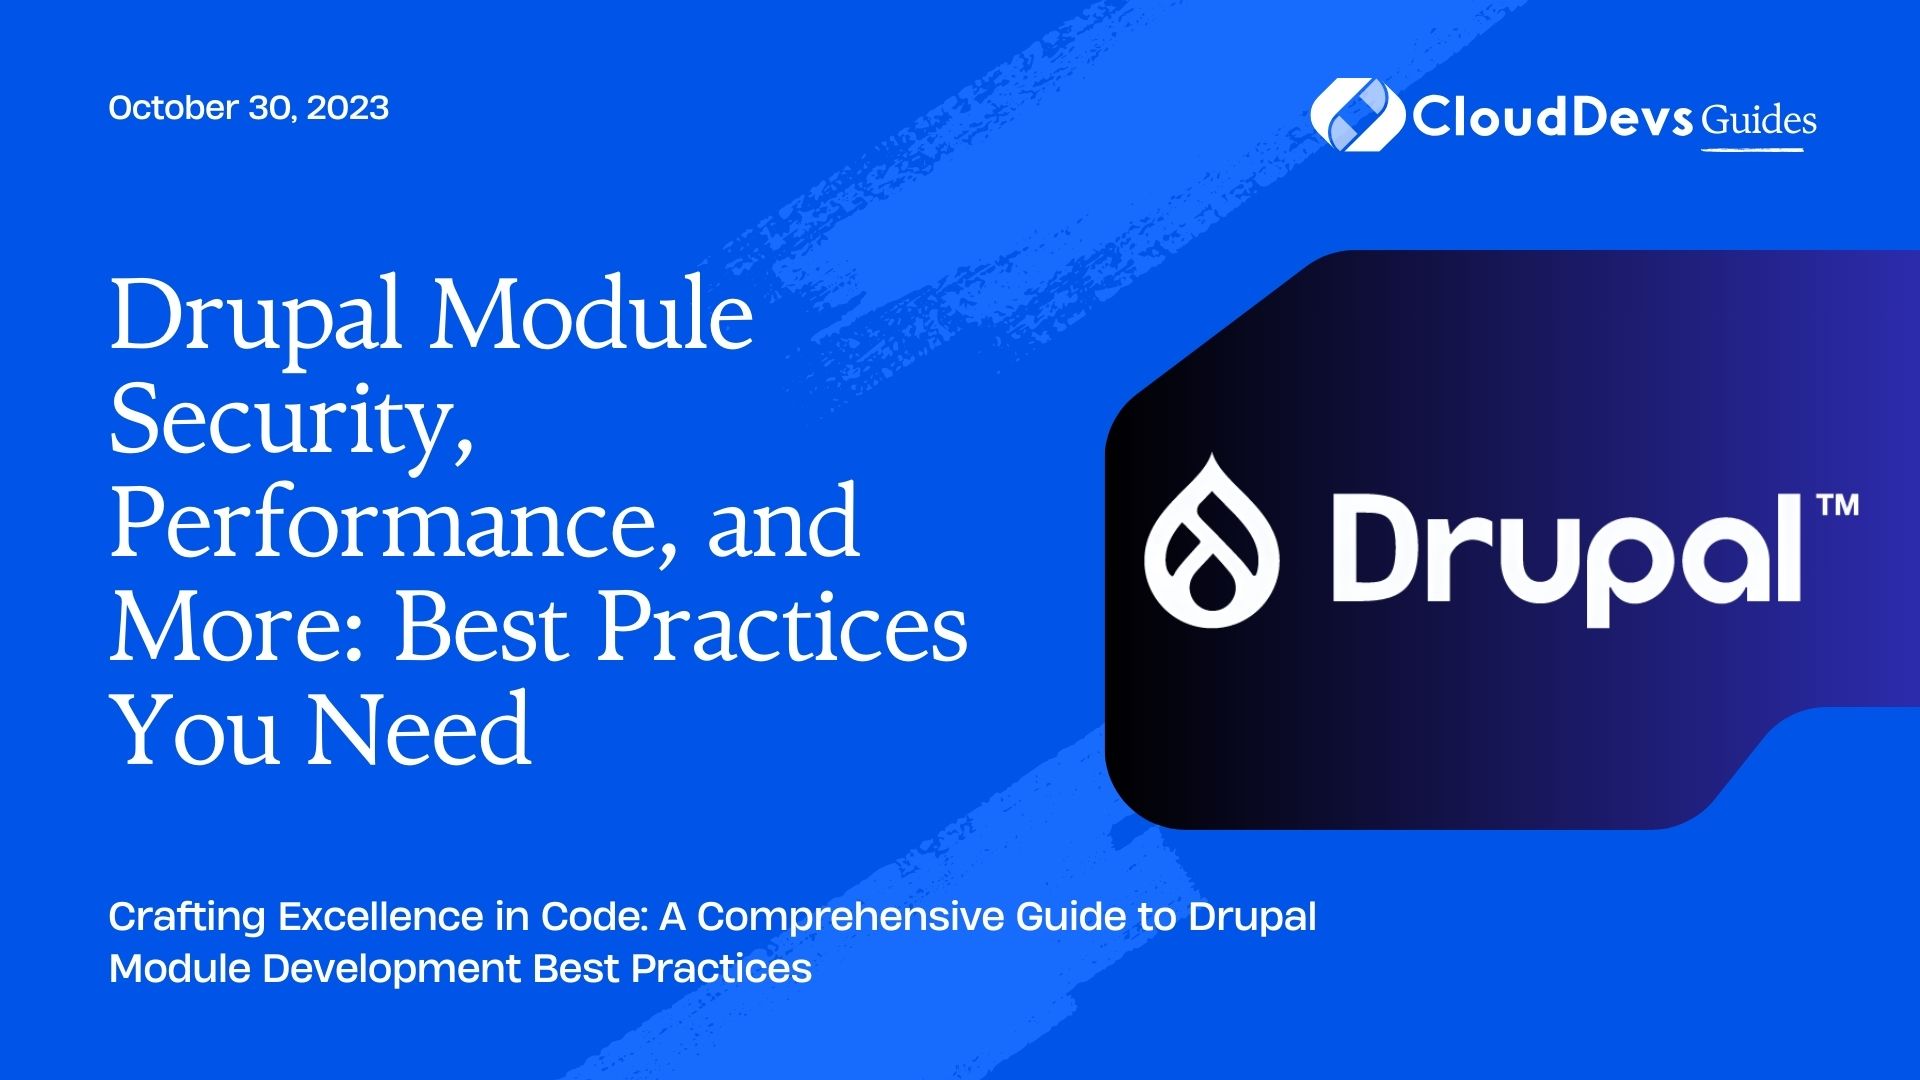 Drupal Module Security, Performance, and More: Best Practices You Need